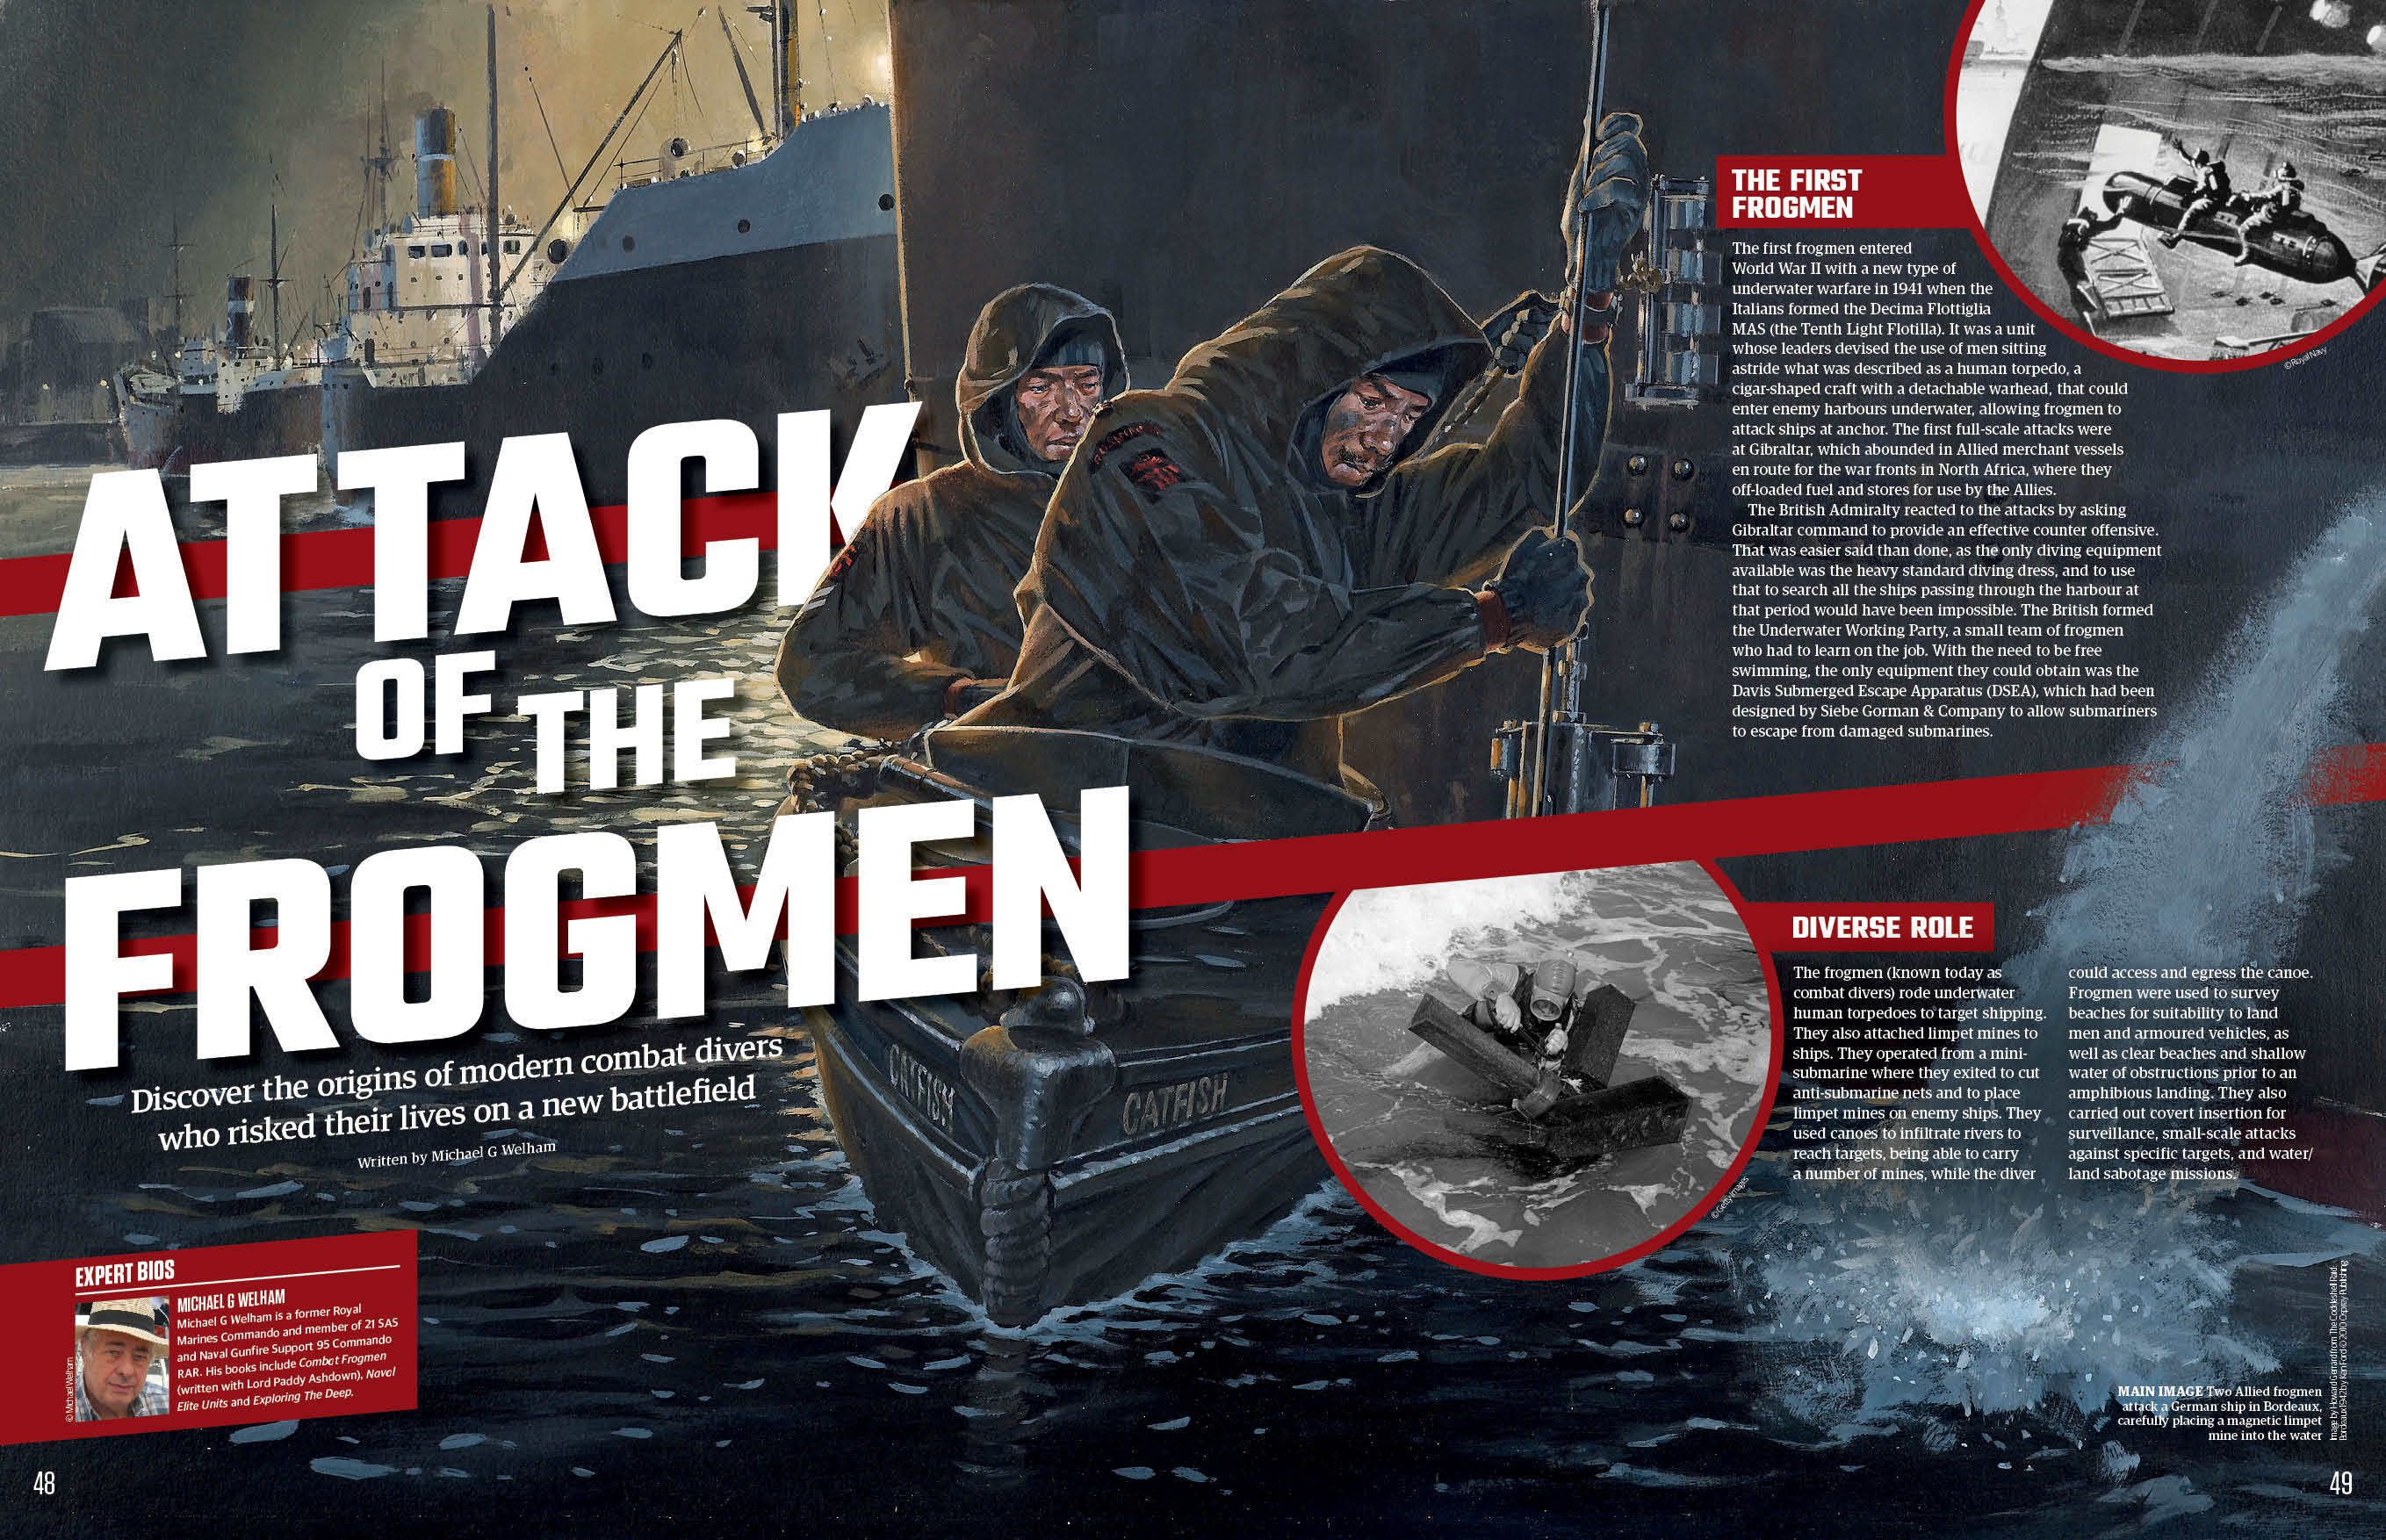 Combat Divers, feature spread All About History 126